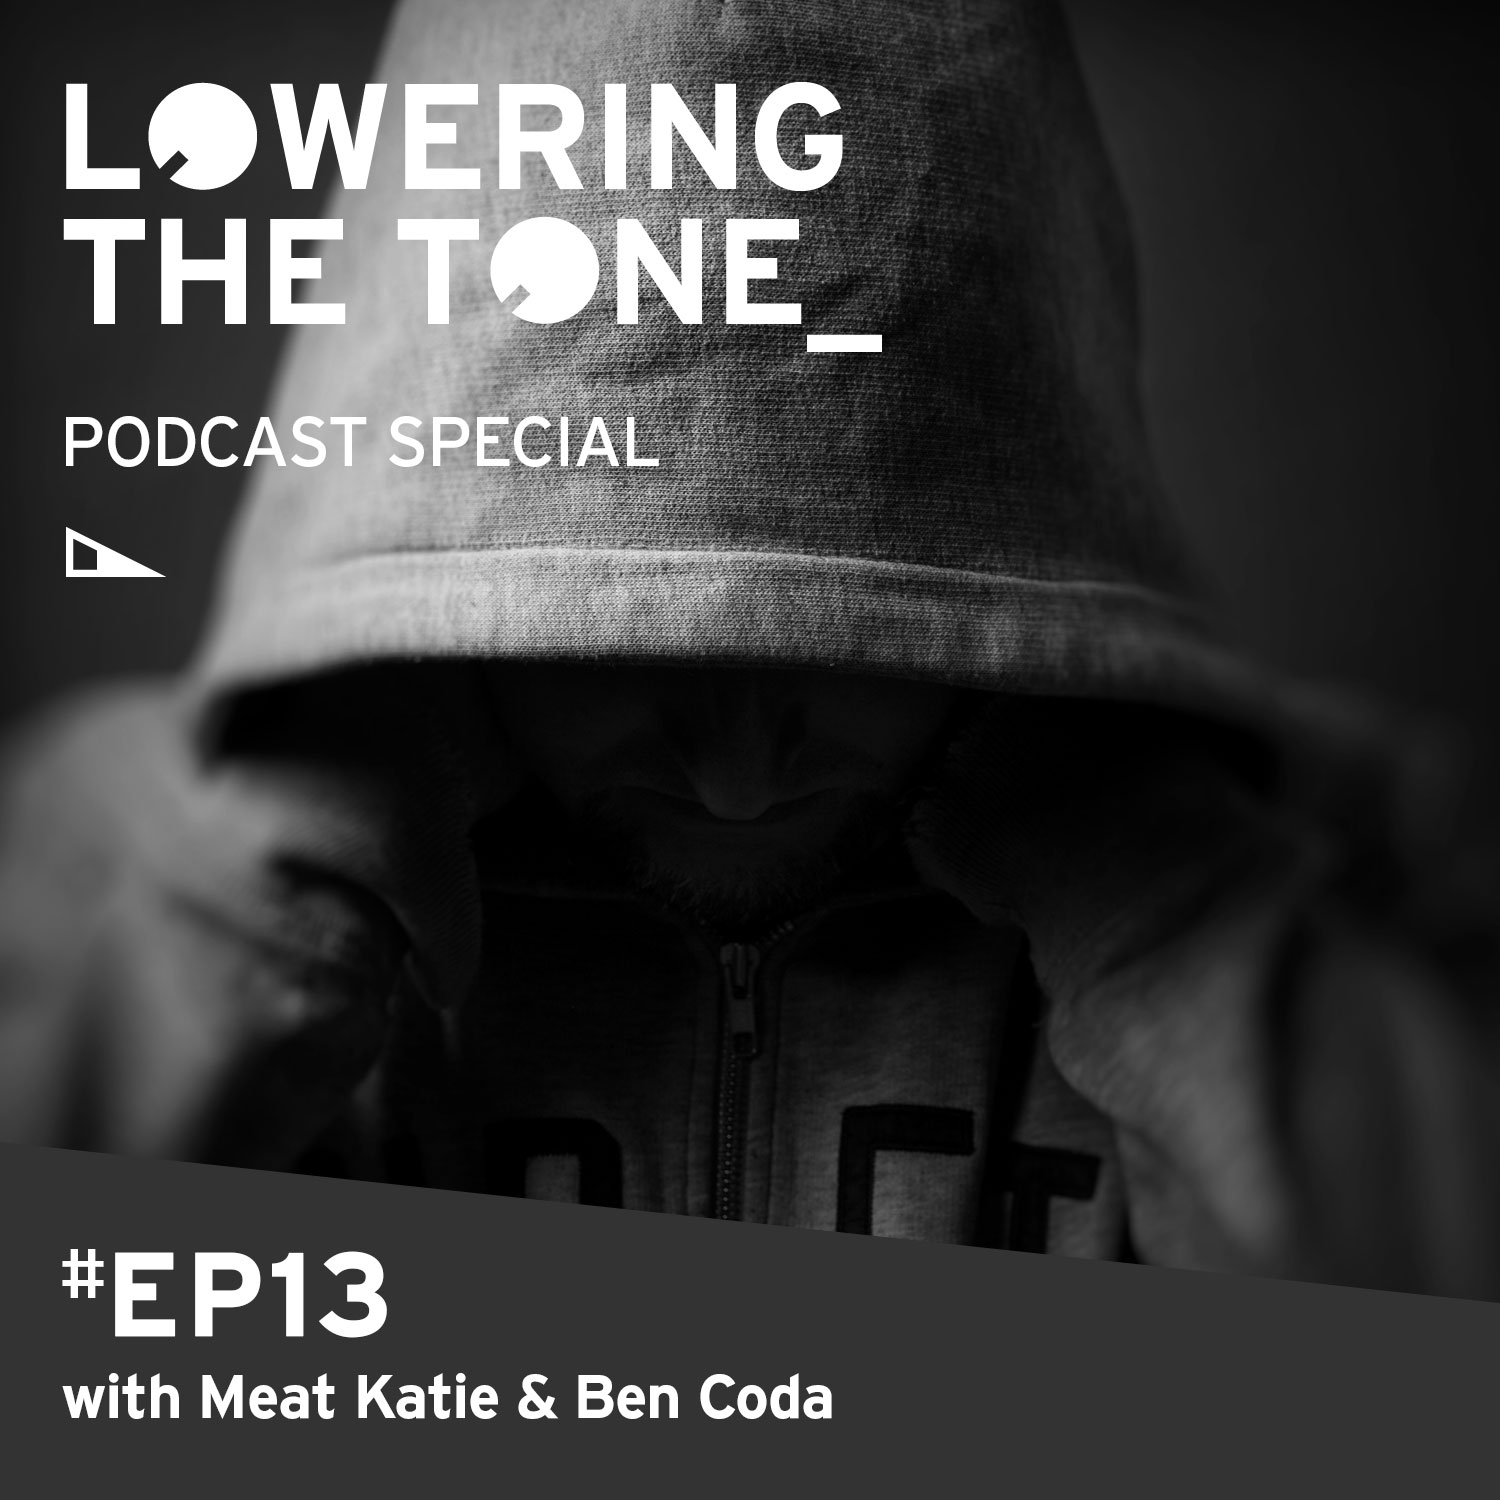 Lowering The Tone Episode 13 - (Special with Meat Katie & Ben Coda)